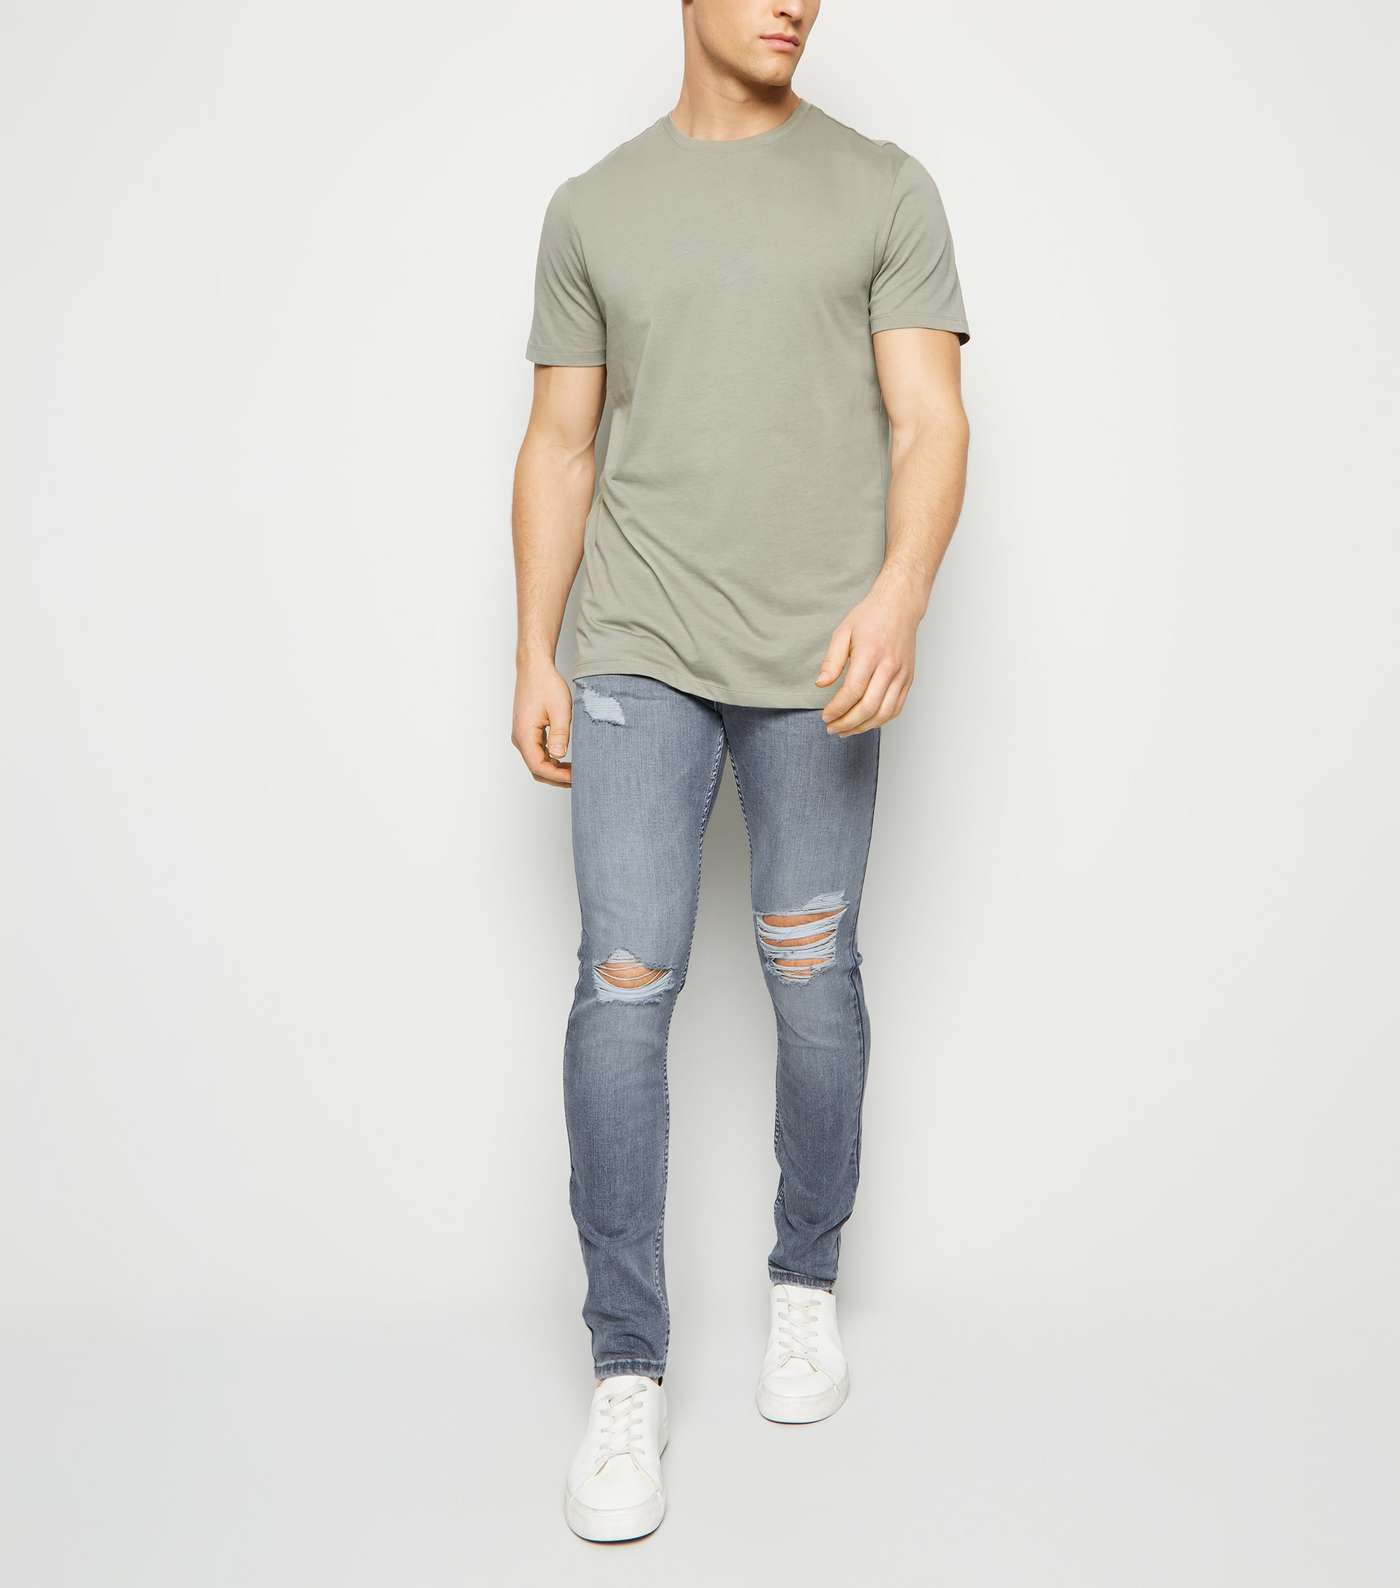 Grey Light Wash Ripped Knee Skinny Jeans Image 2